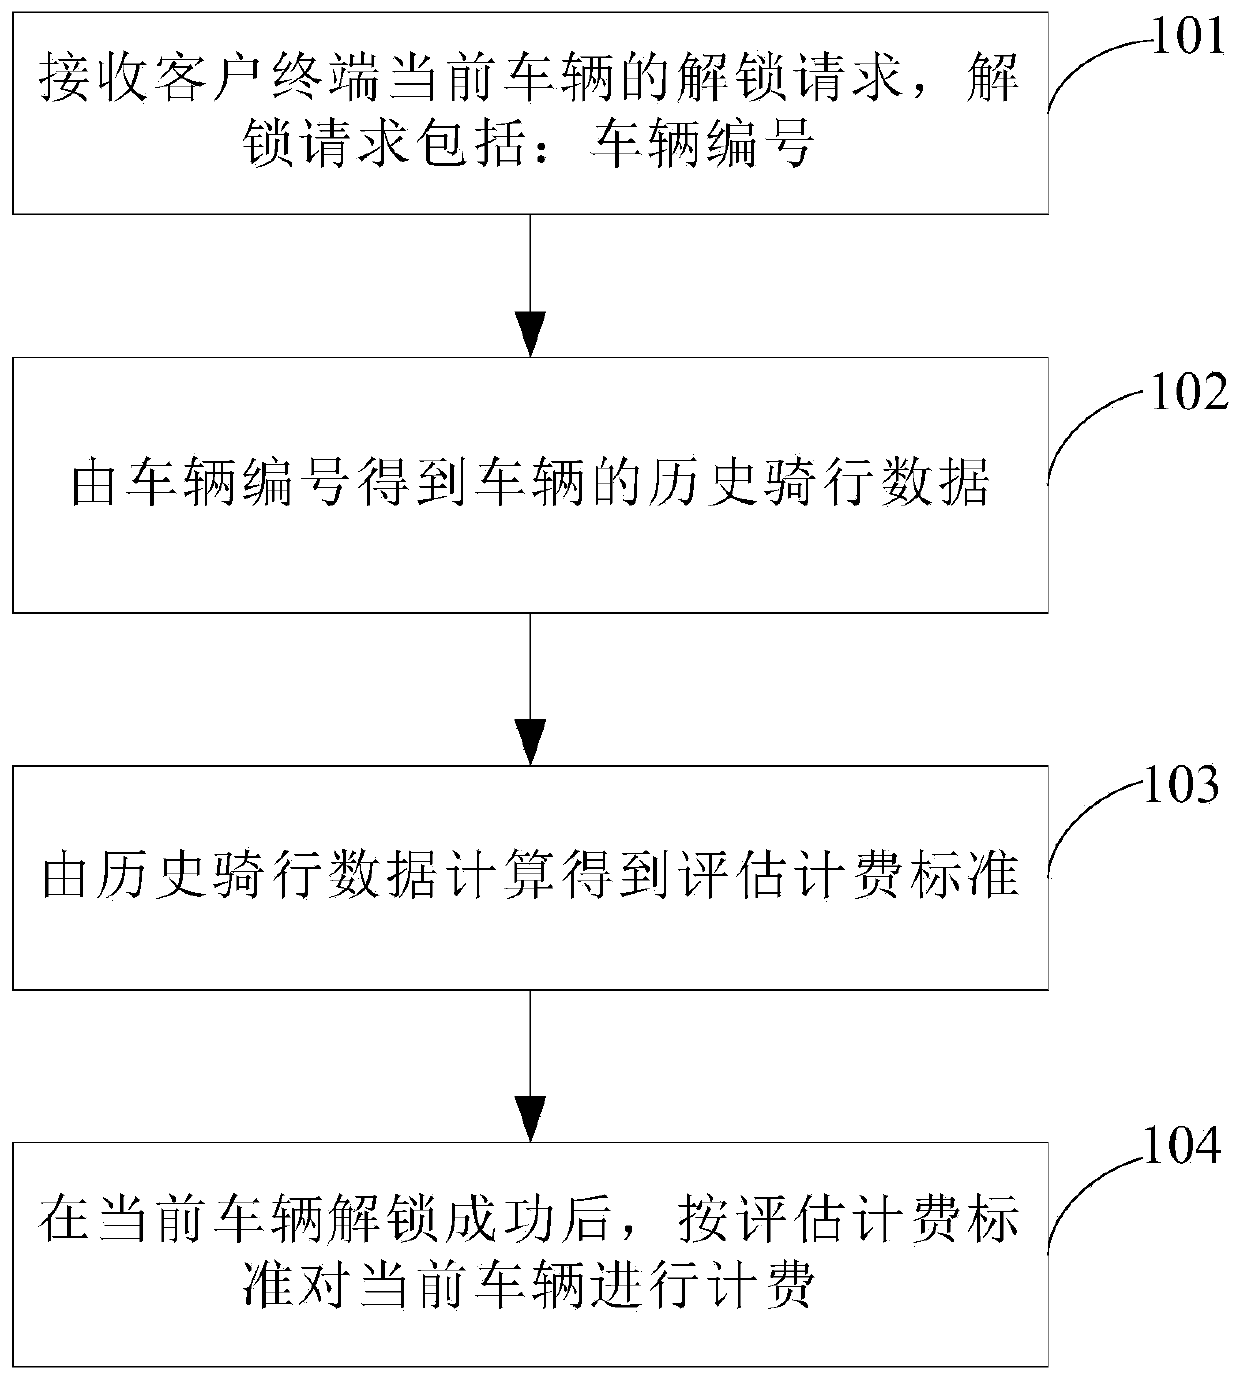 Shared vehicle charging method and system